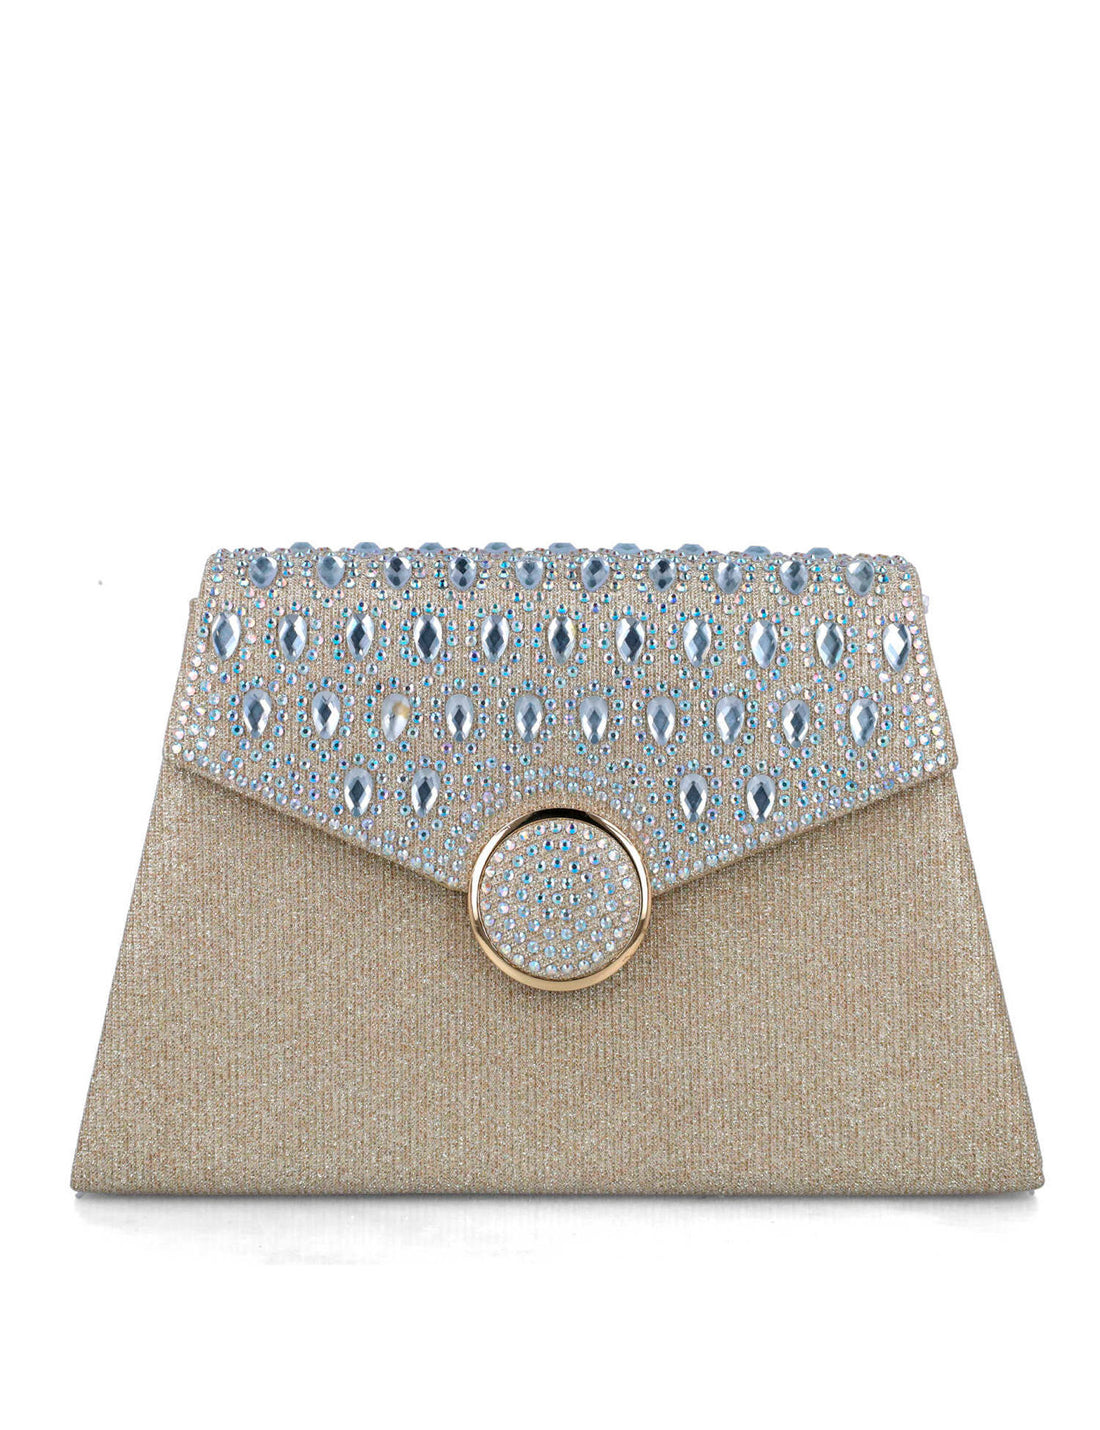 Beige Clutch With Embellished Flap_85636_00_01